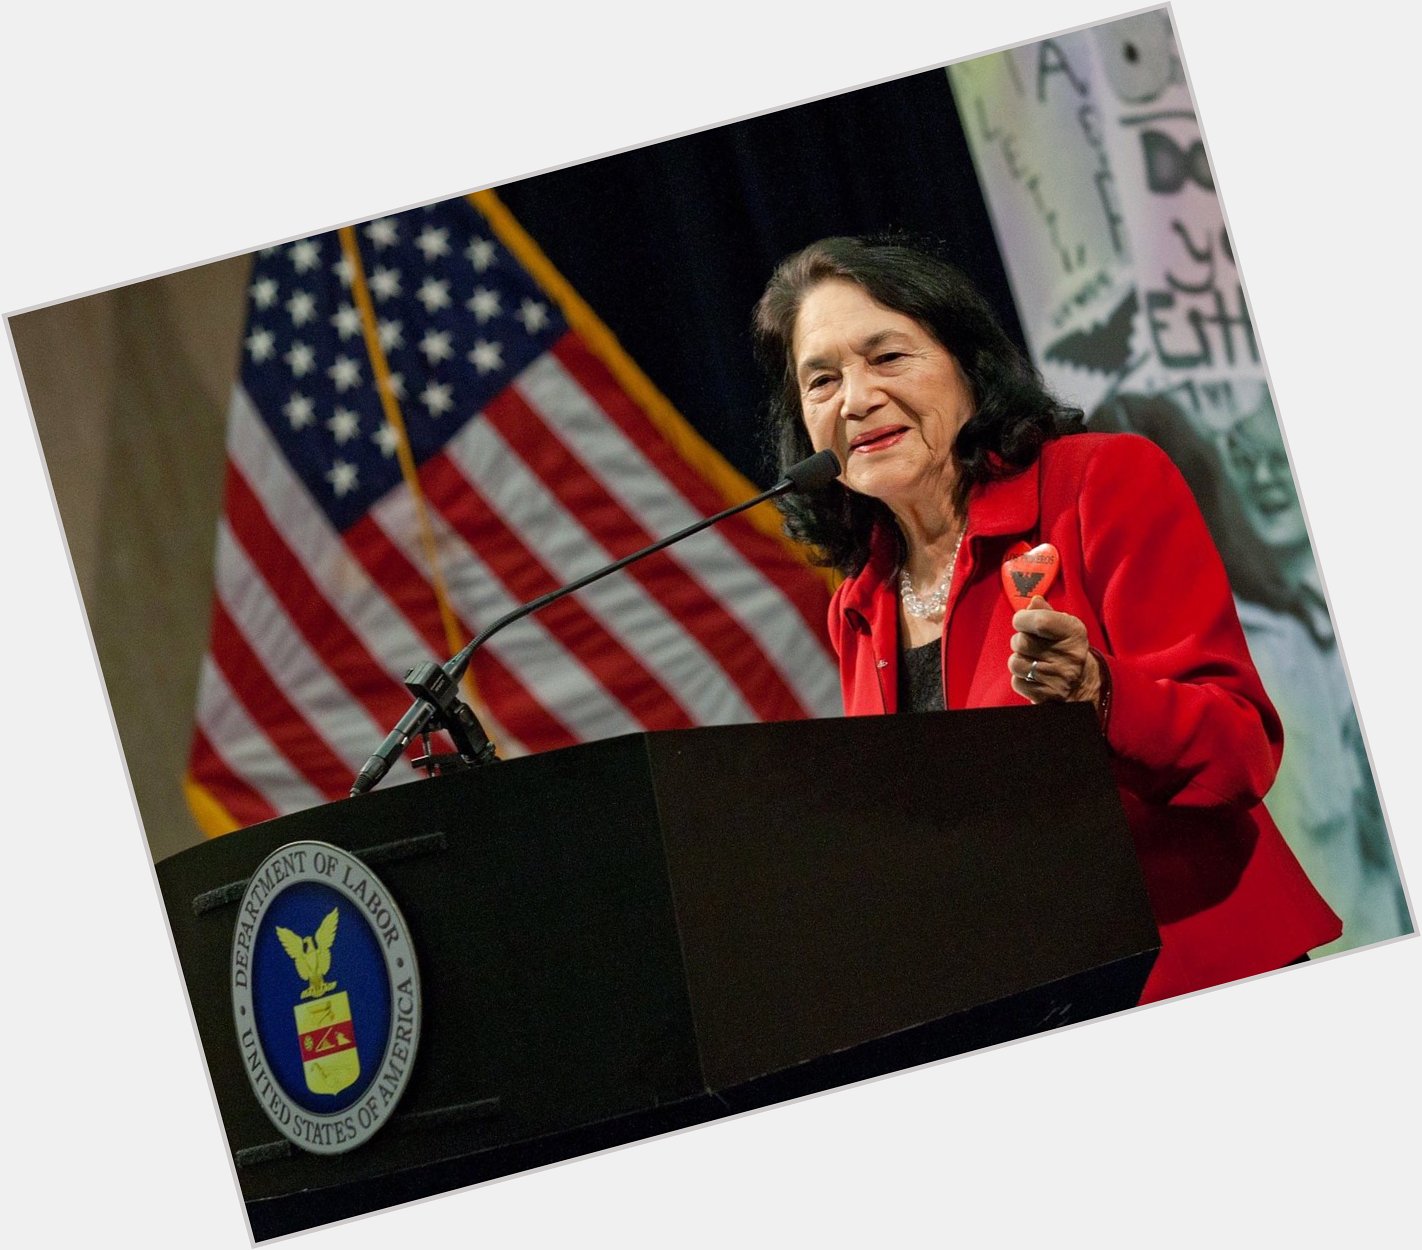 Happy 87th Birthday to Dolores Huerta, a labor leader, activist and our honorary sister!   